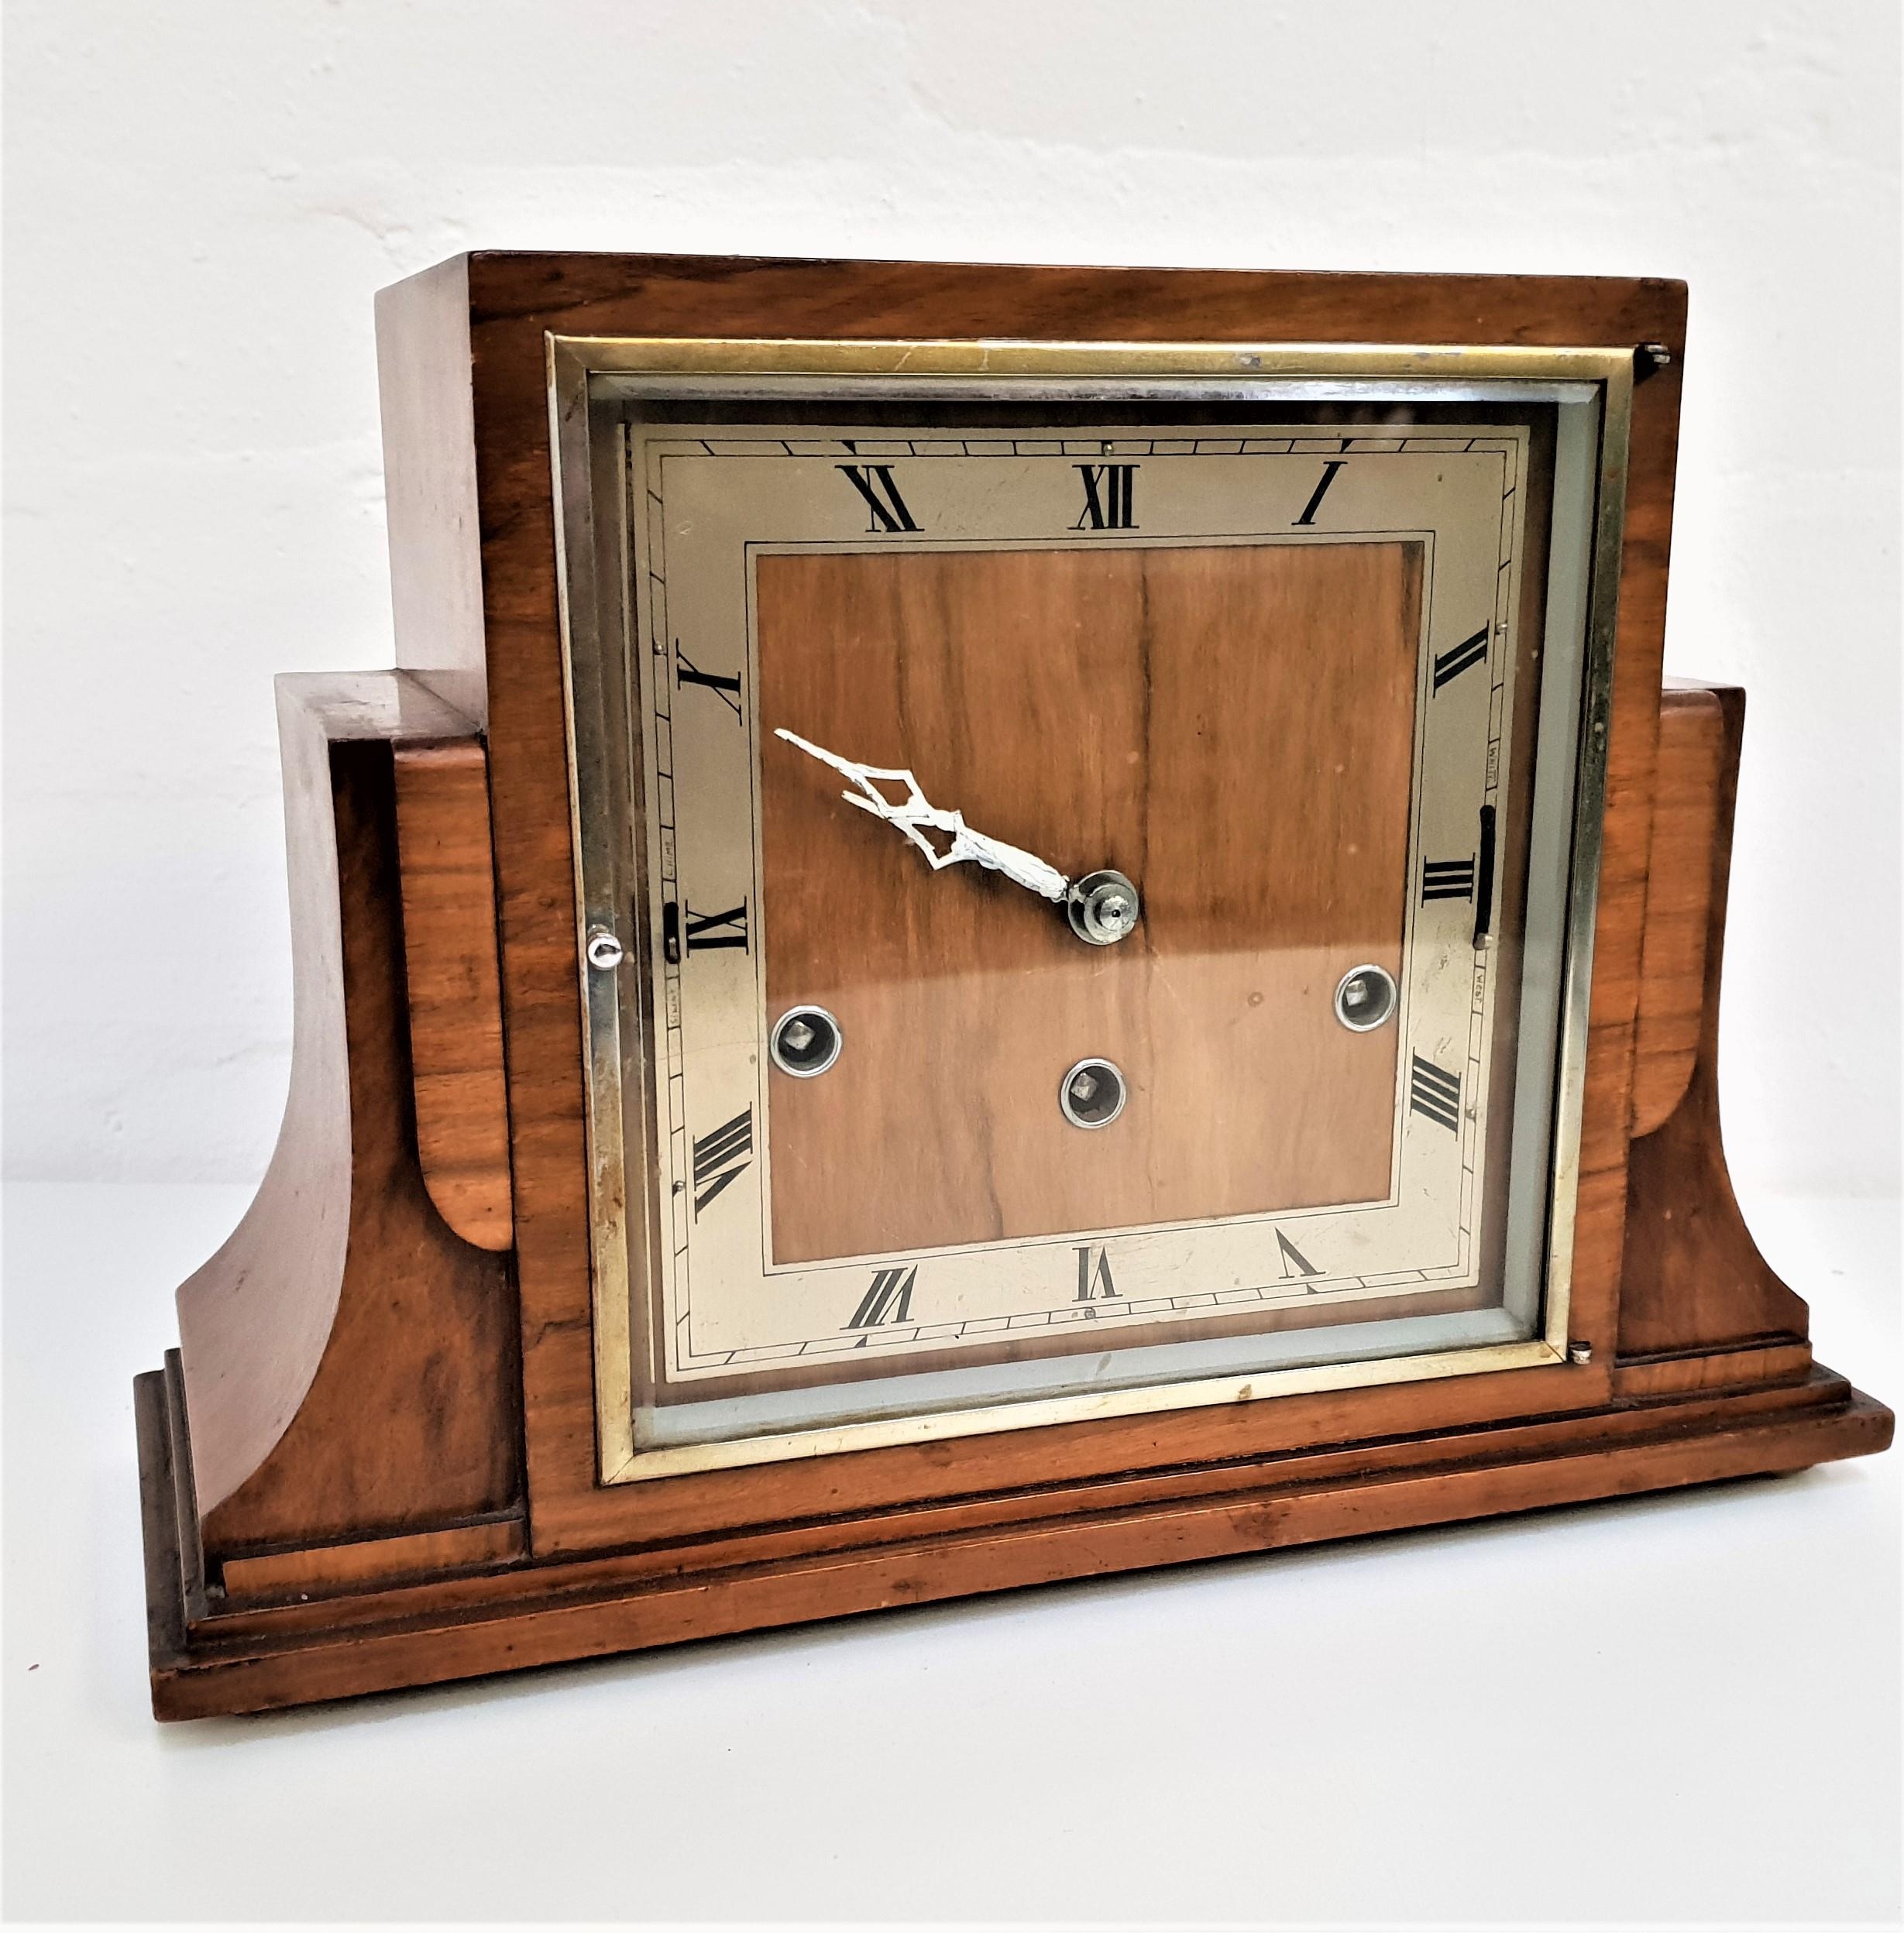 1930s WALNUT CASED MANTLE CLOCK with a Westminster chime and a silvered square dial with Roman